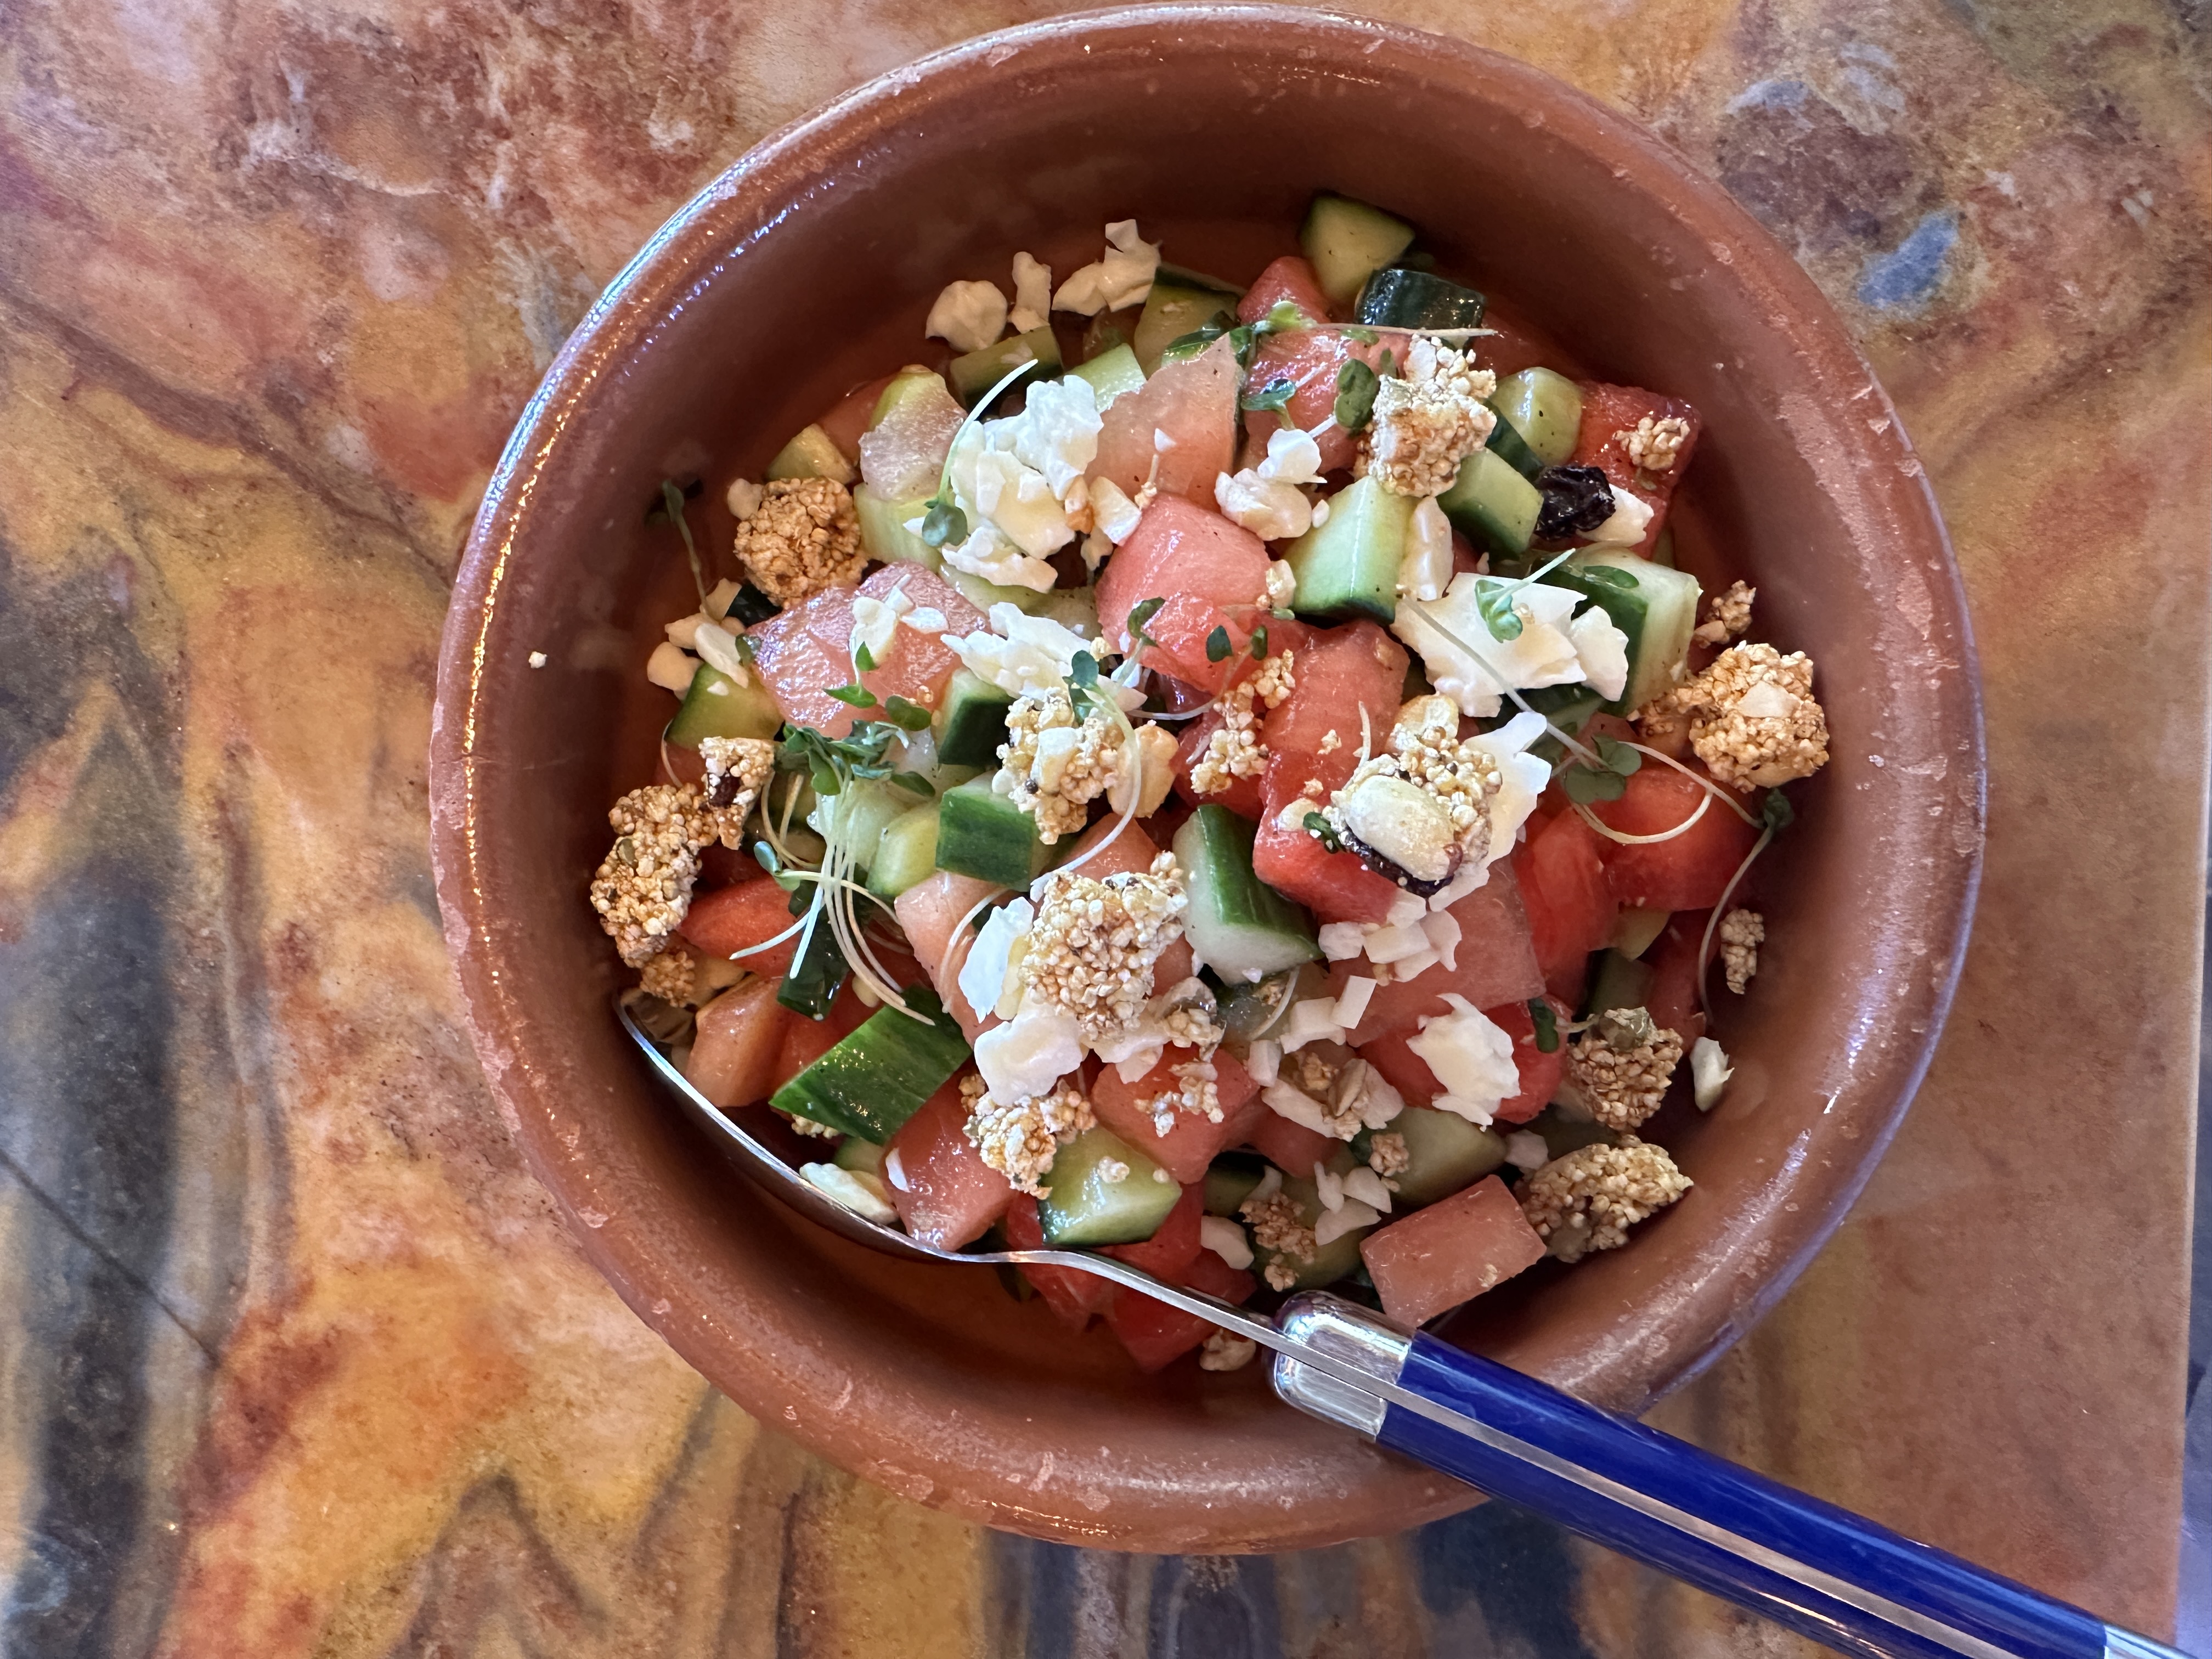 An image of a watermelon salad with cucumber and cotija cheese